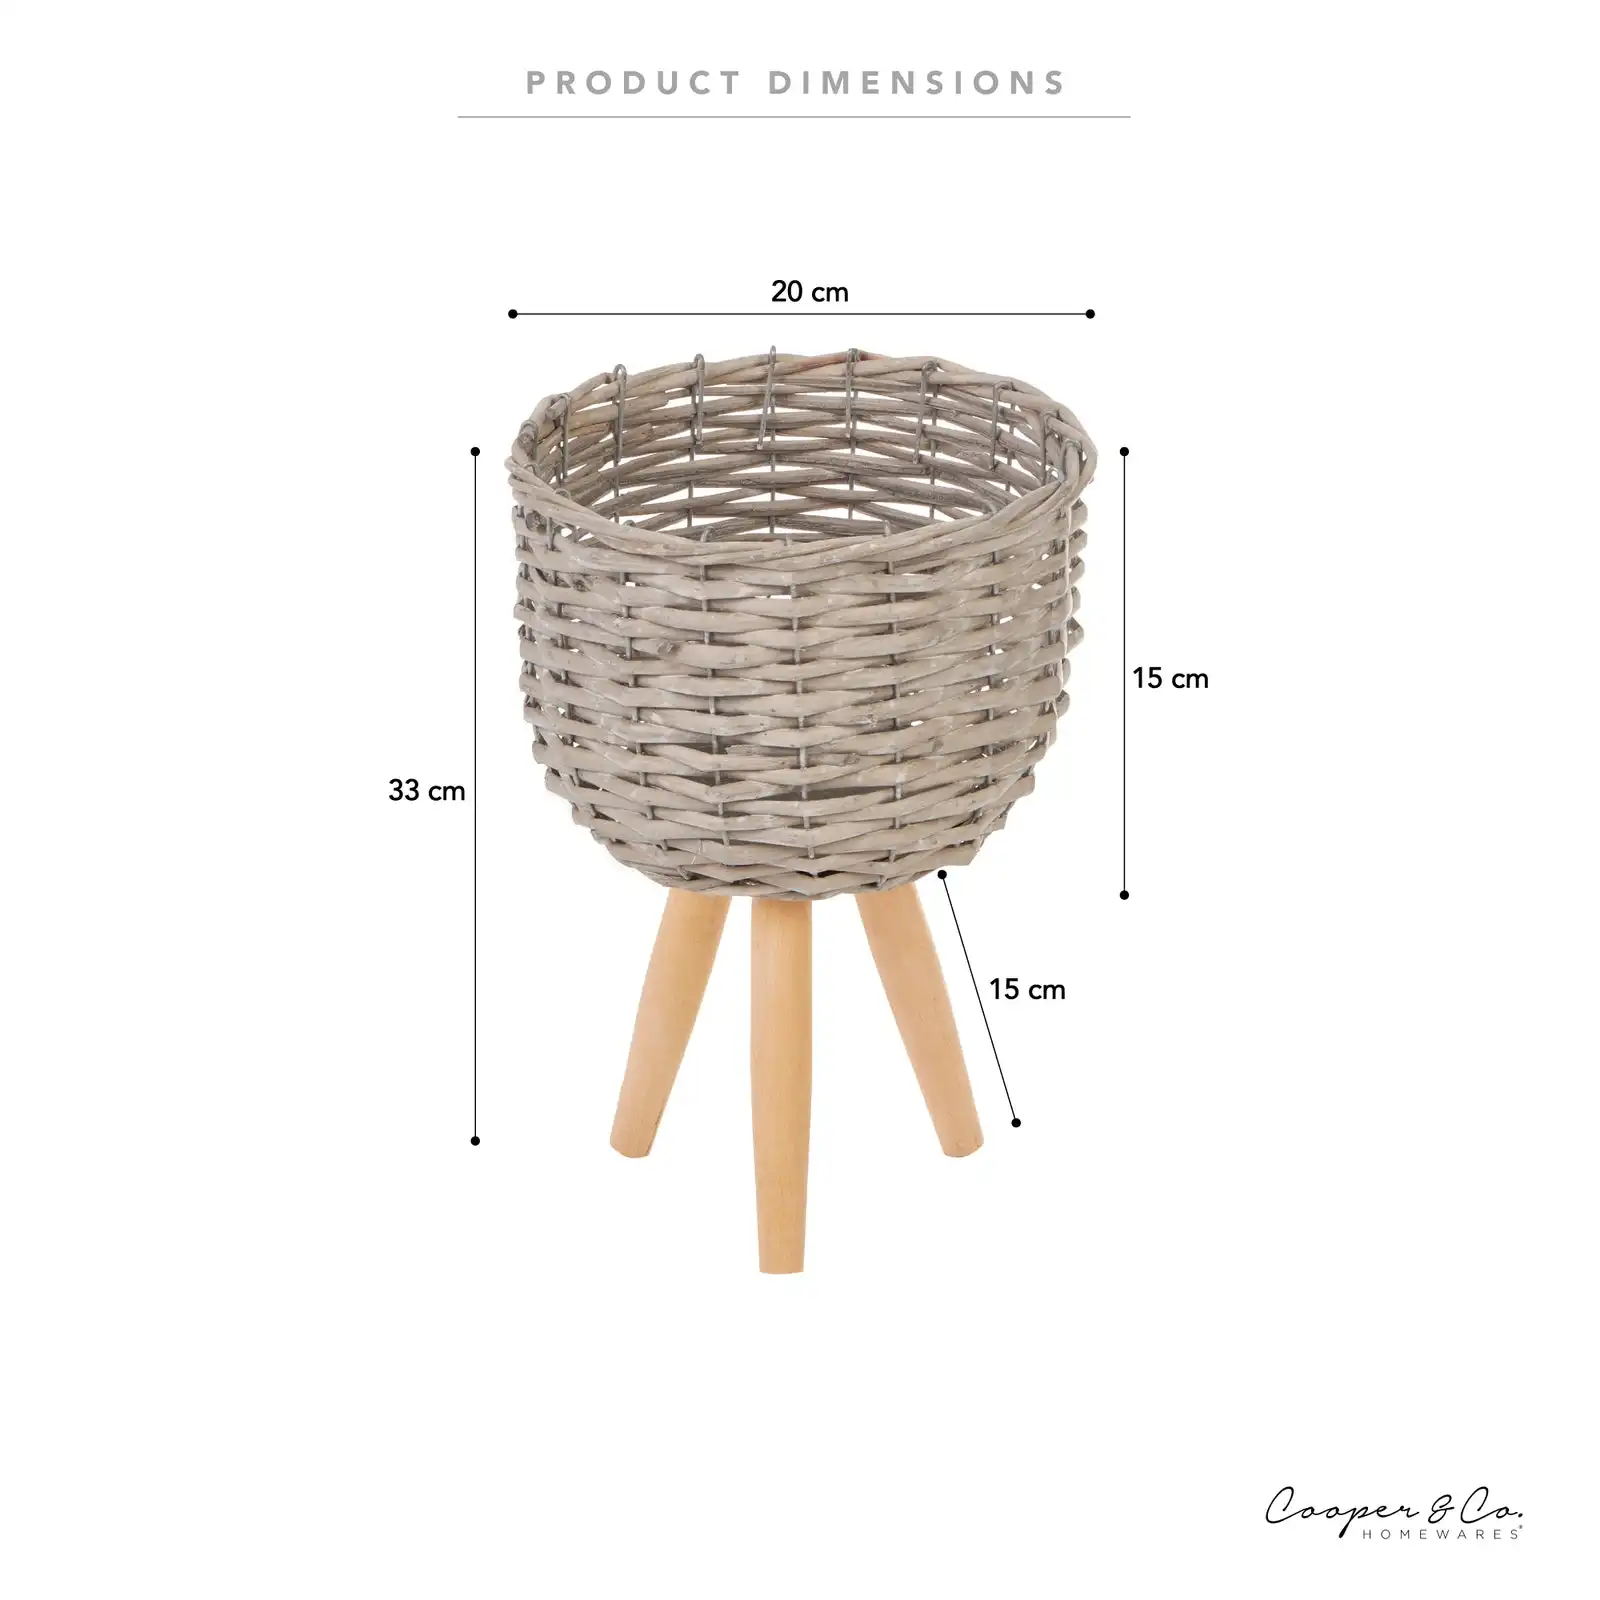 Cooper & Co. Small Natural Wicker Woven Flower Basket Pot Planter Stand GRY 31cm